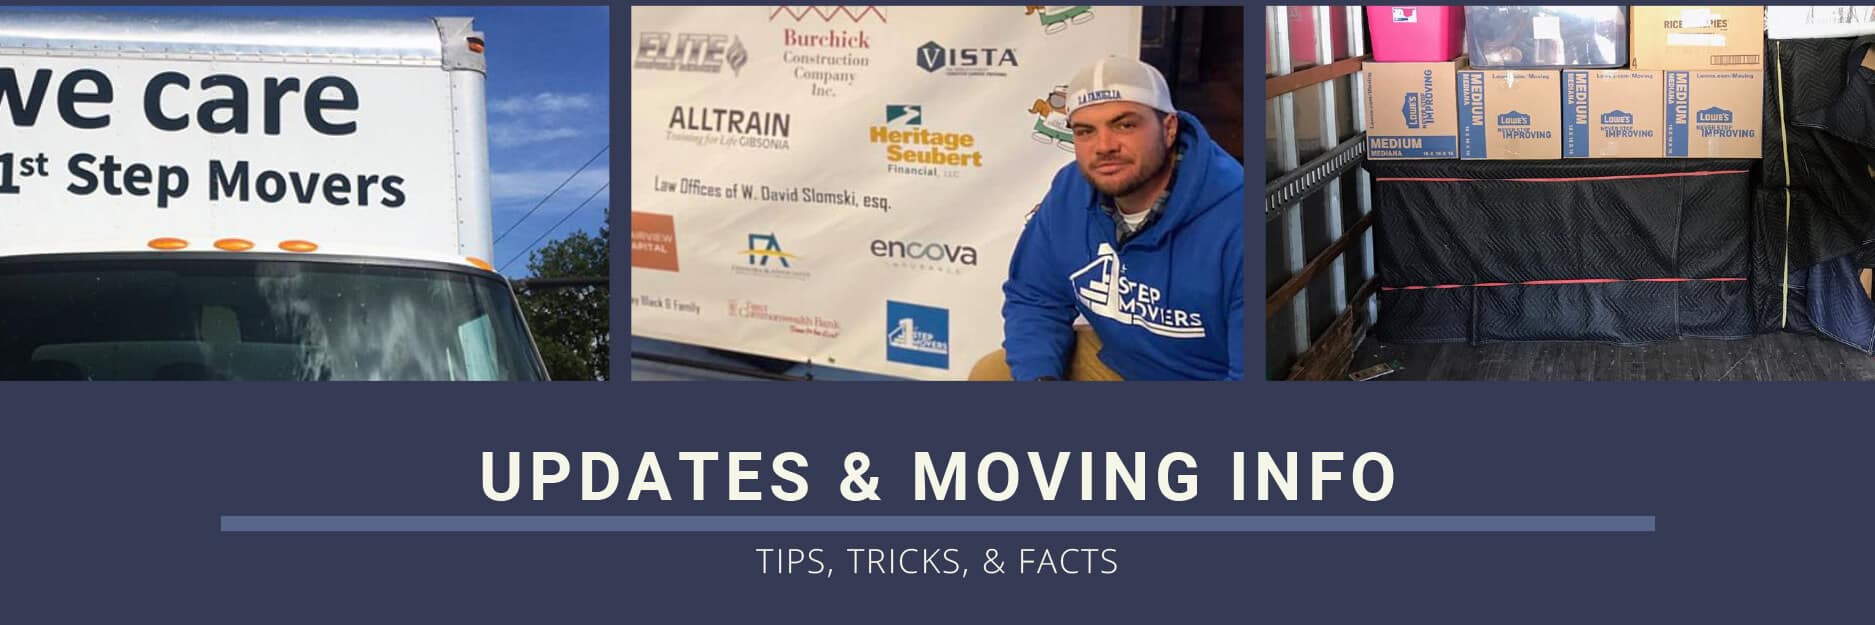 1st-step-movers-blog-page-header | 1st Step Movers